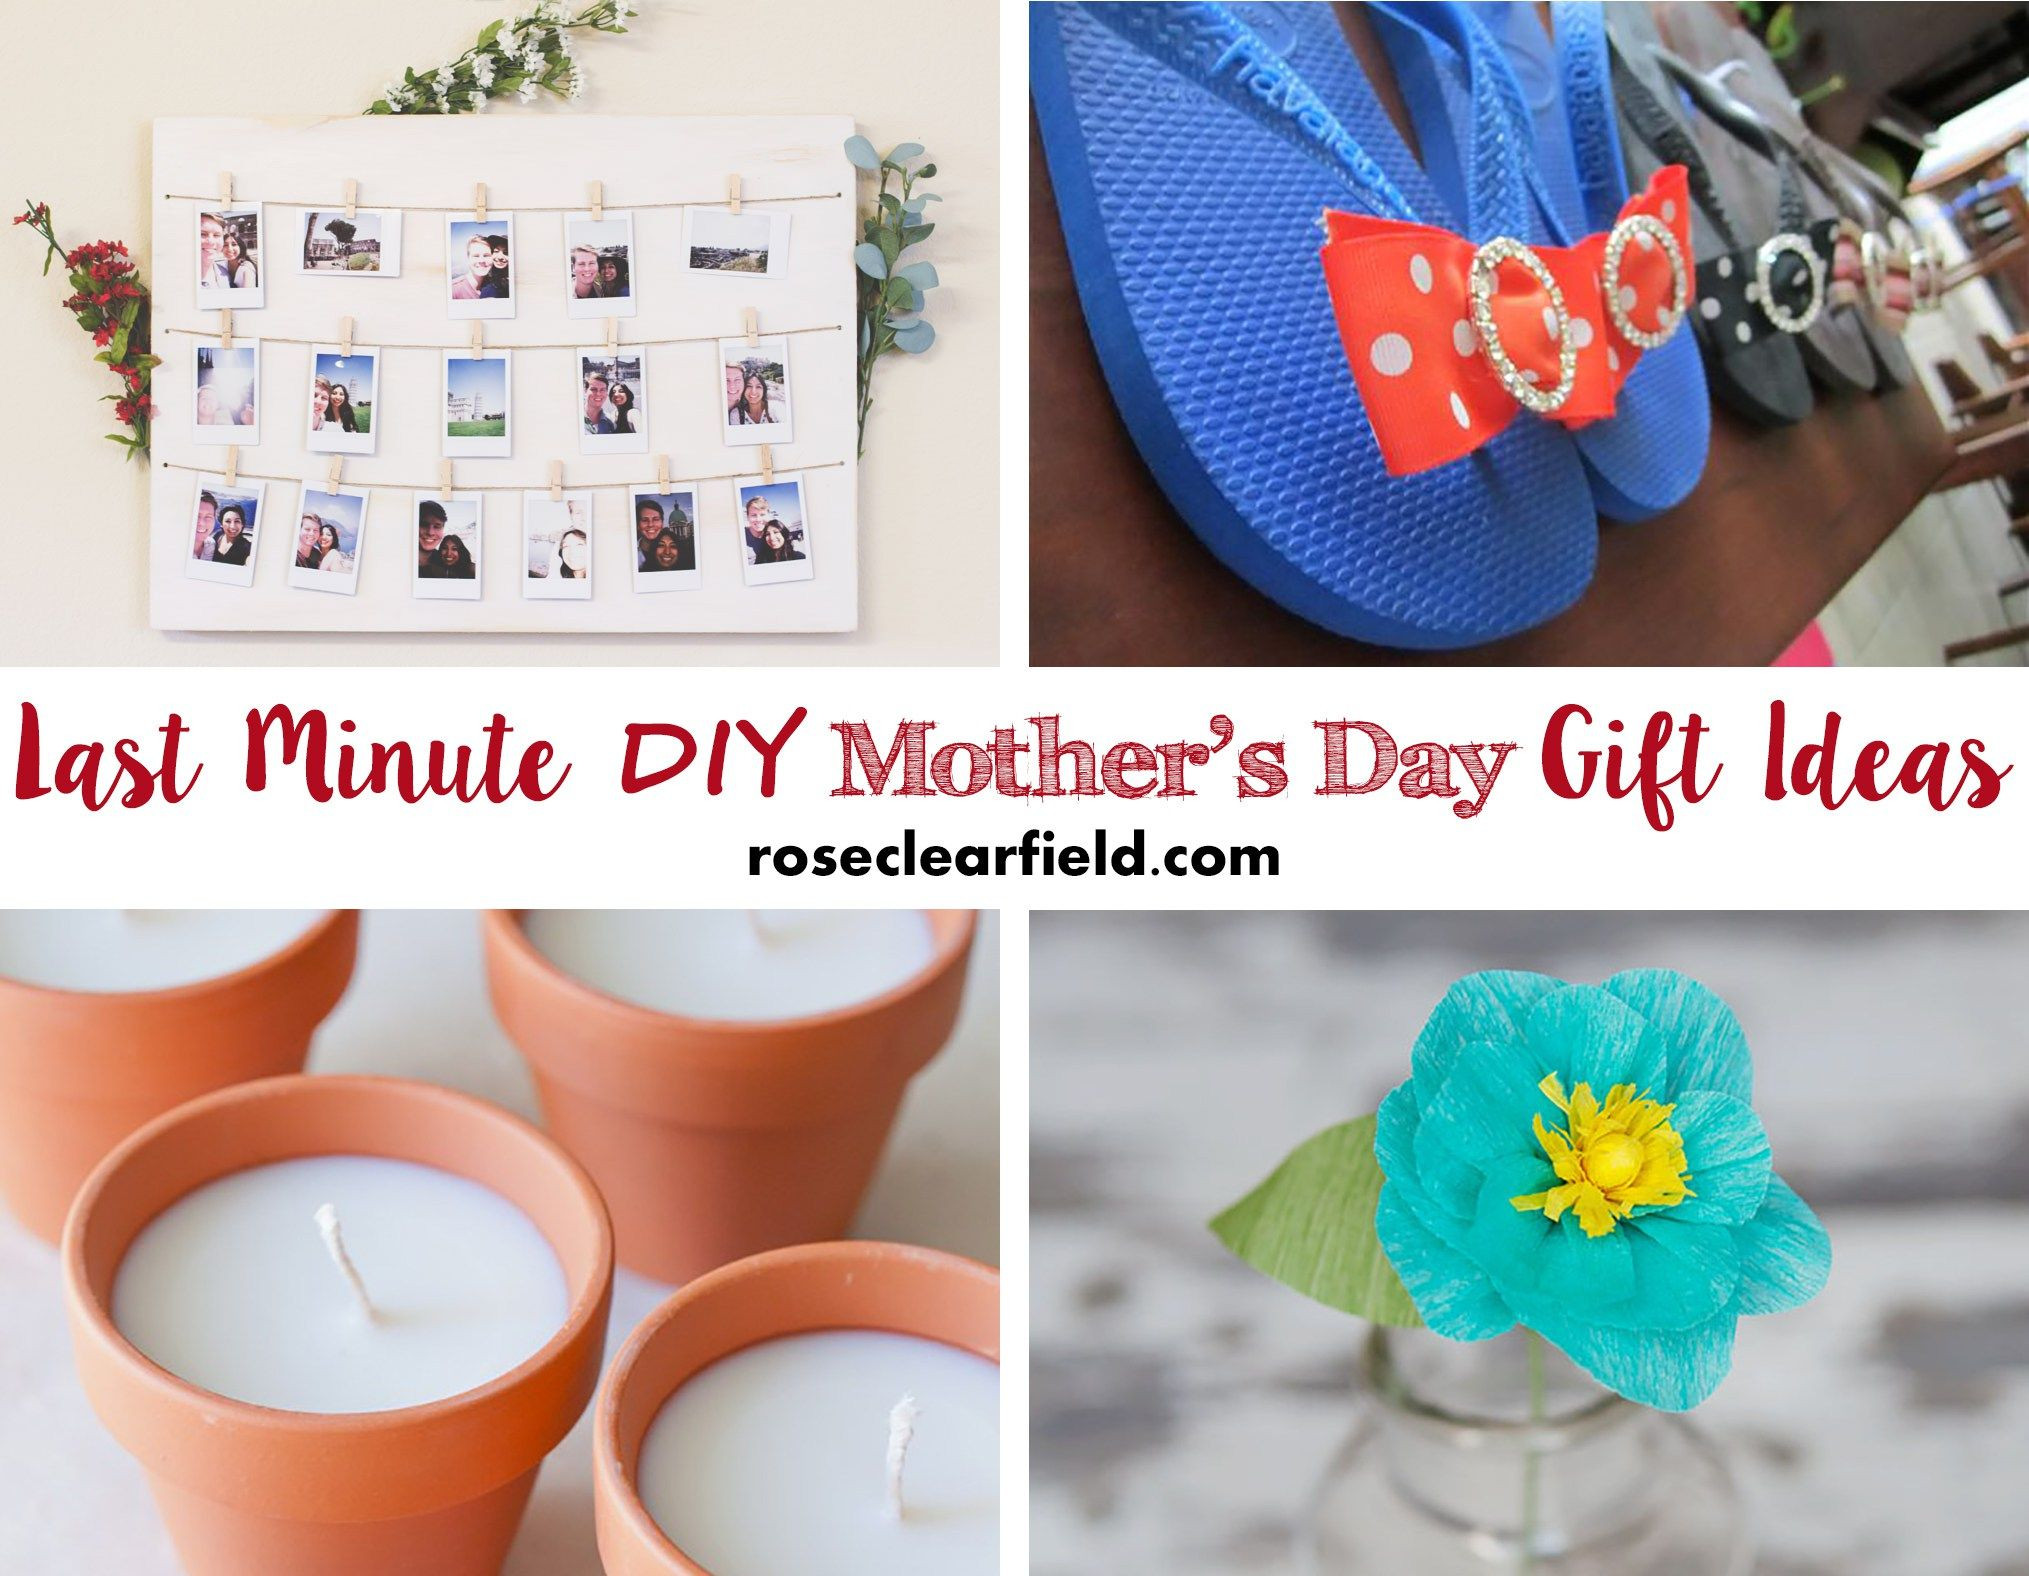 Last Minute Mothers Day Gift Ideas
 Last Minute DIY Mother s Day Gift Ideas